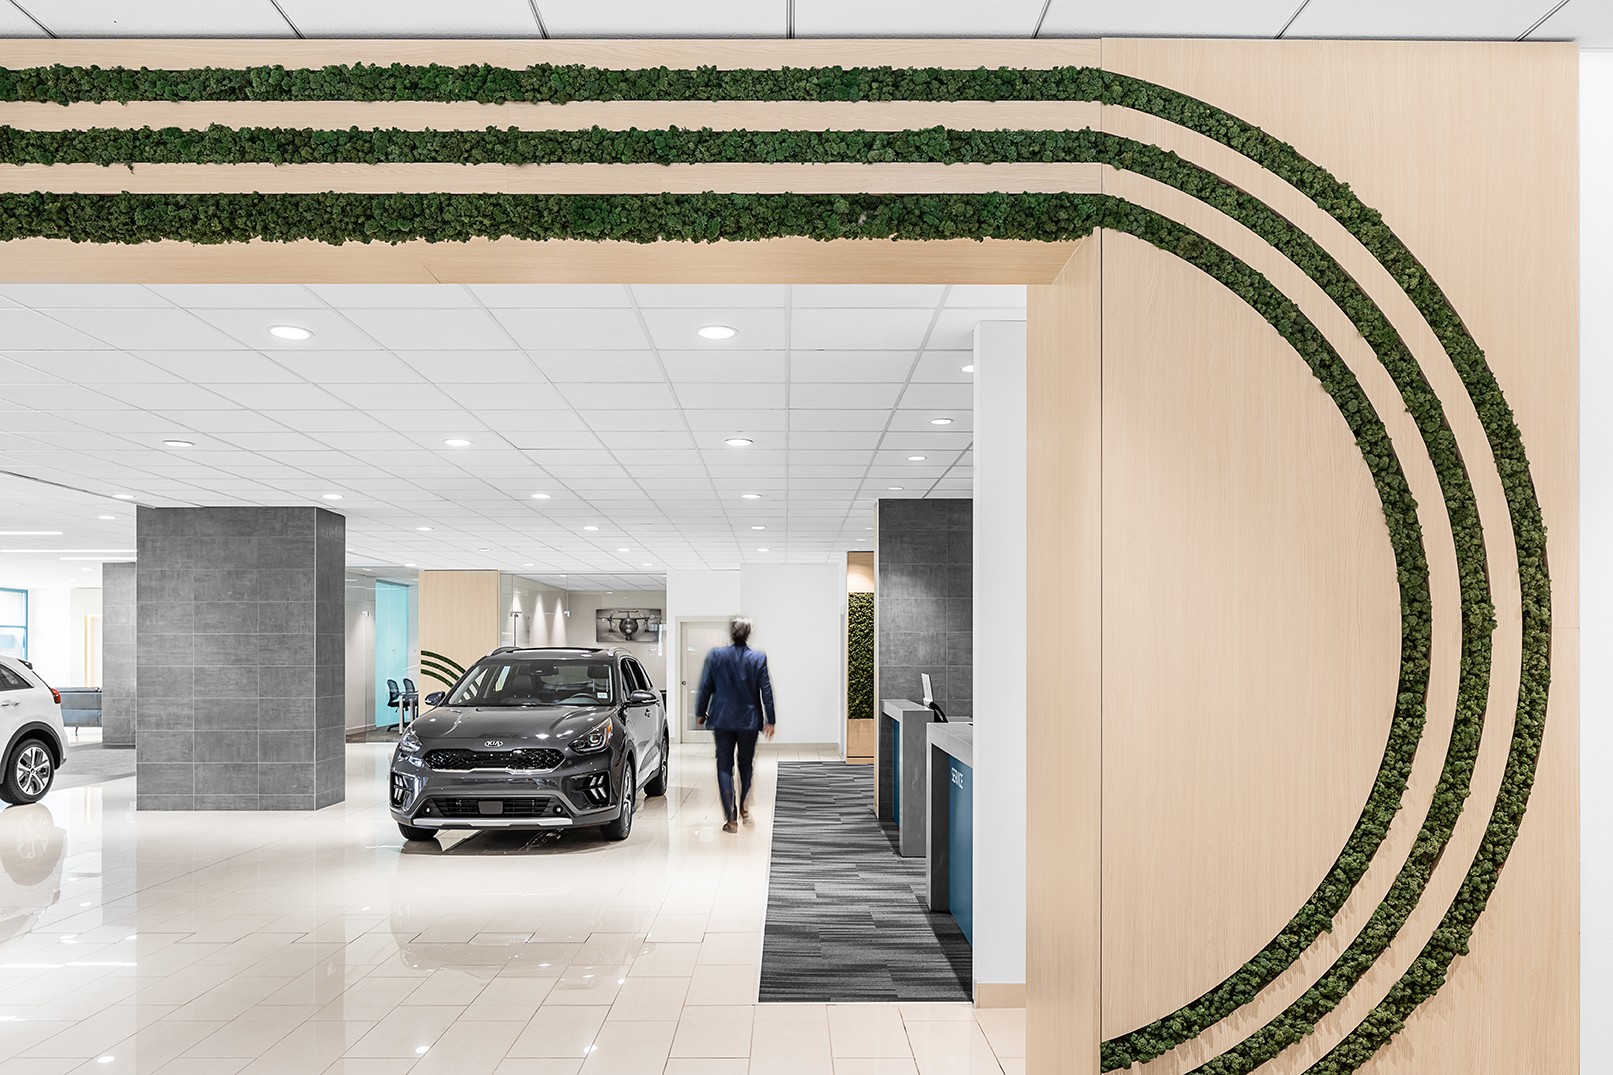 , , Kia Electric Vehicle Showroom in Vancouver  B.C. , by Cutler